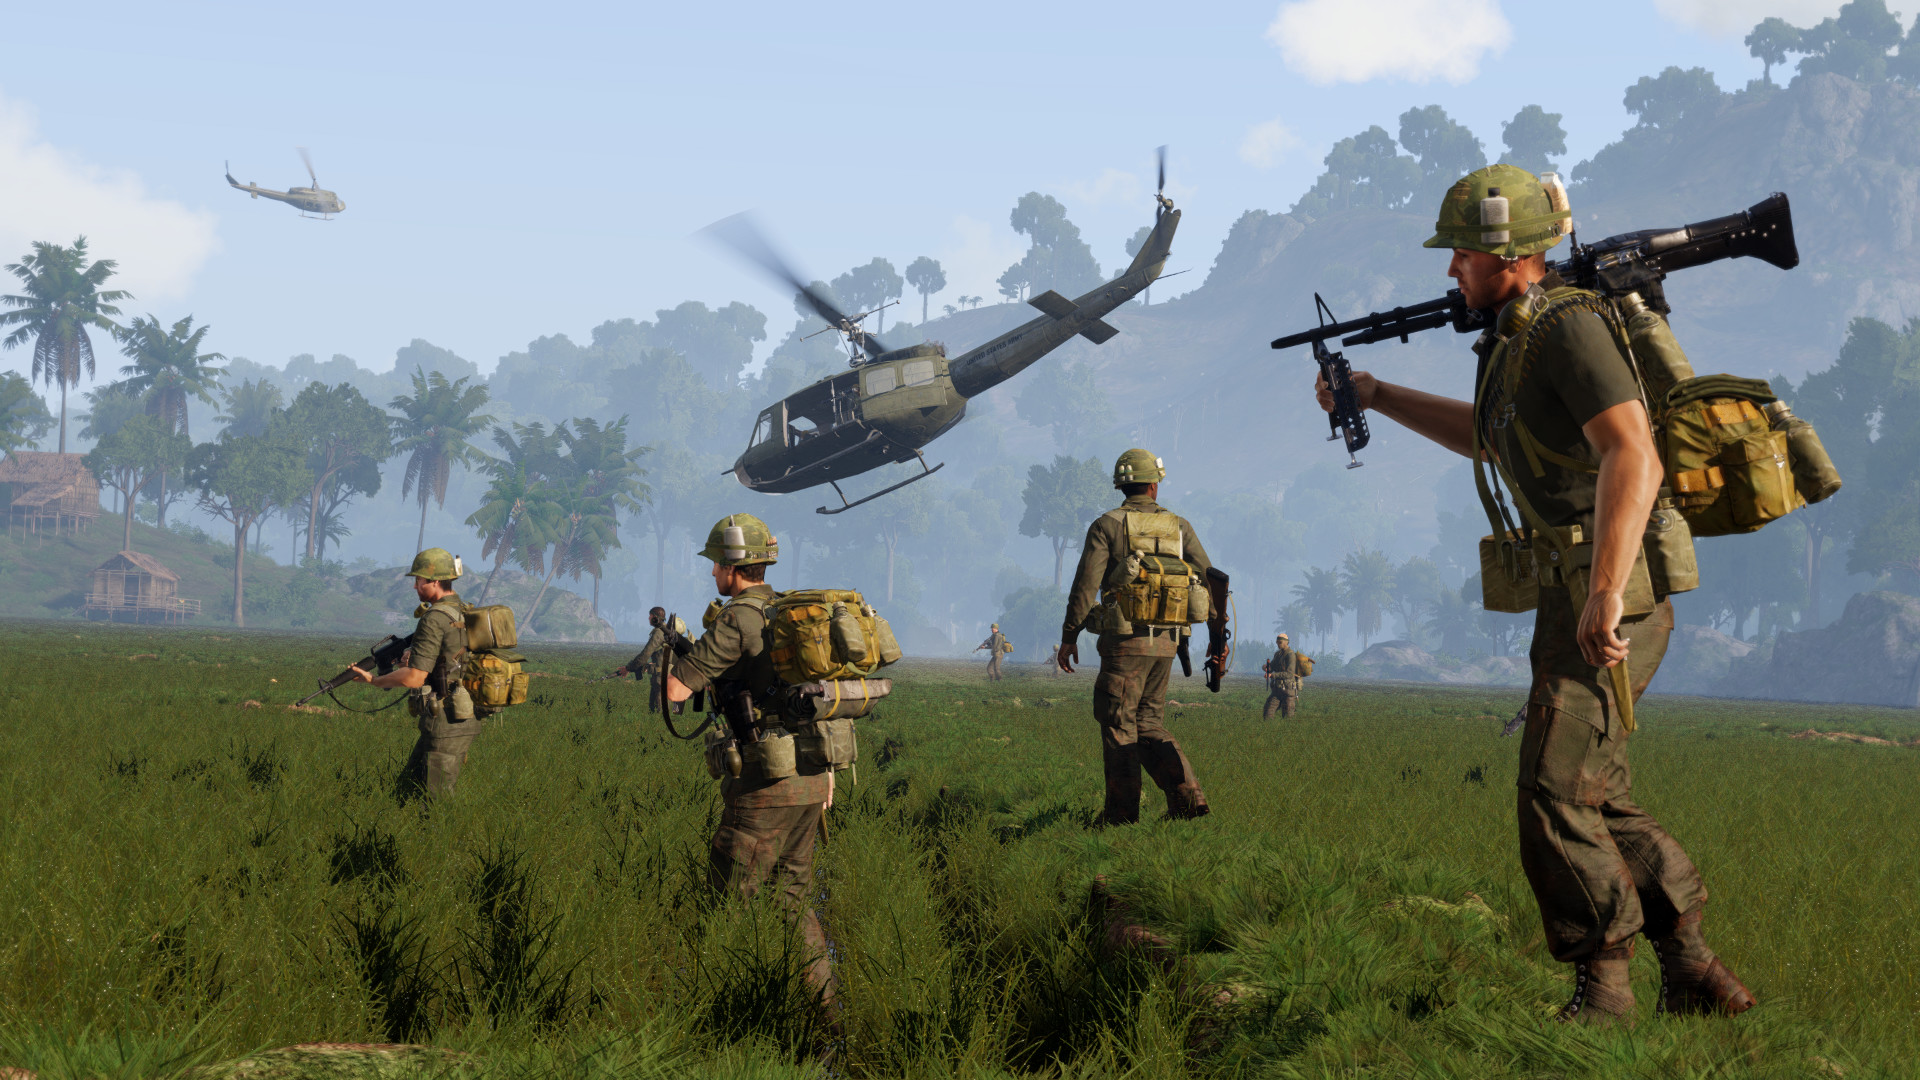 New Arma 3 DLC brings the the Vietnam War to the military tactical